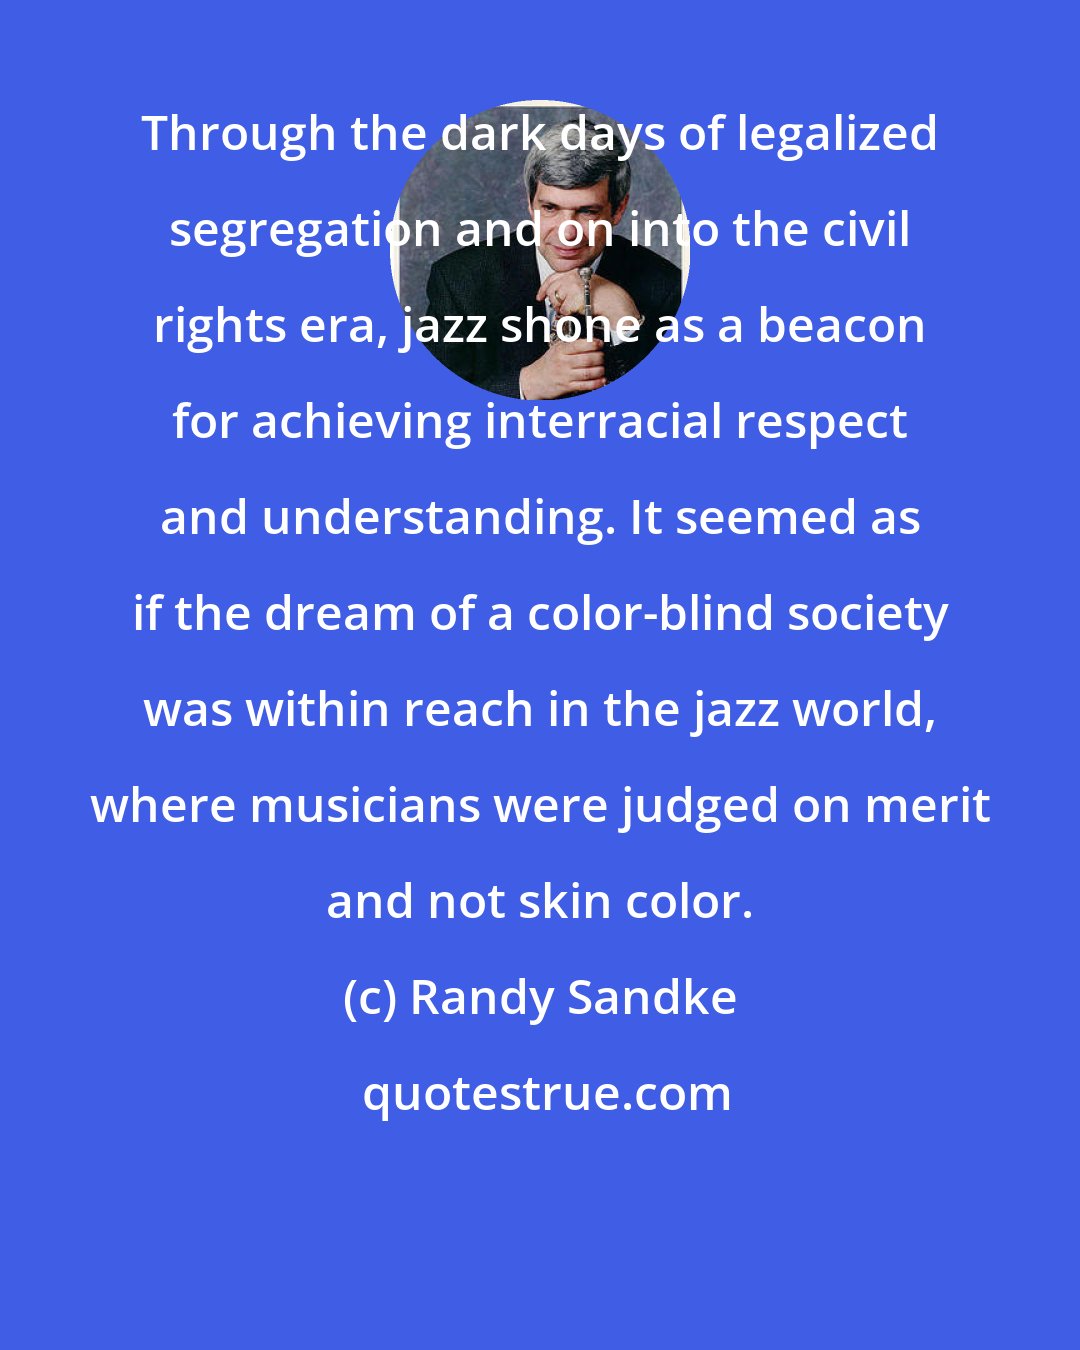 Randy Sandke: Through the dark days of legalized segregation and on into the civil rights era, jazz shone as a beacon for achieving interracial respect and understanding. It seemed as if the dream of a color-blind society was within reach in the jazz world, where musicians were judged on merit and not skin color.